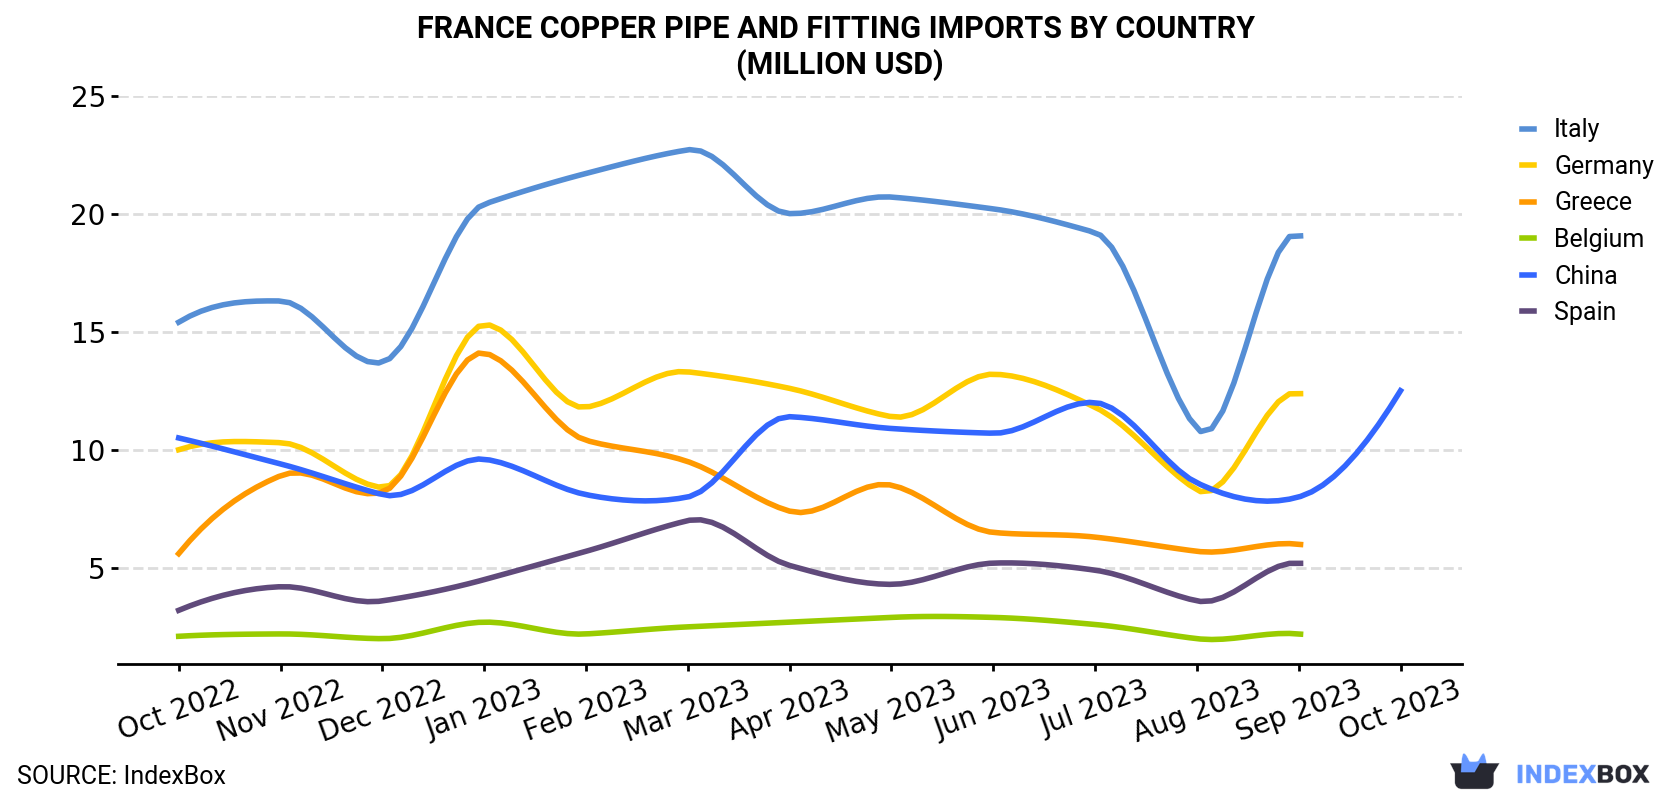 France Copper Pipe And Fitting Imports By Country (Million USD)